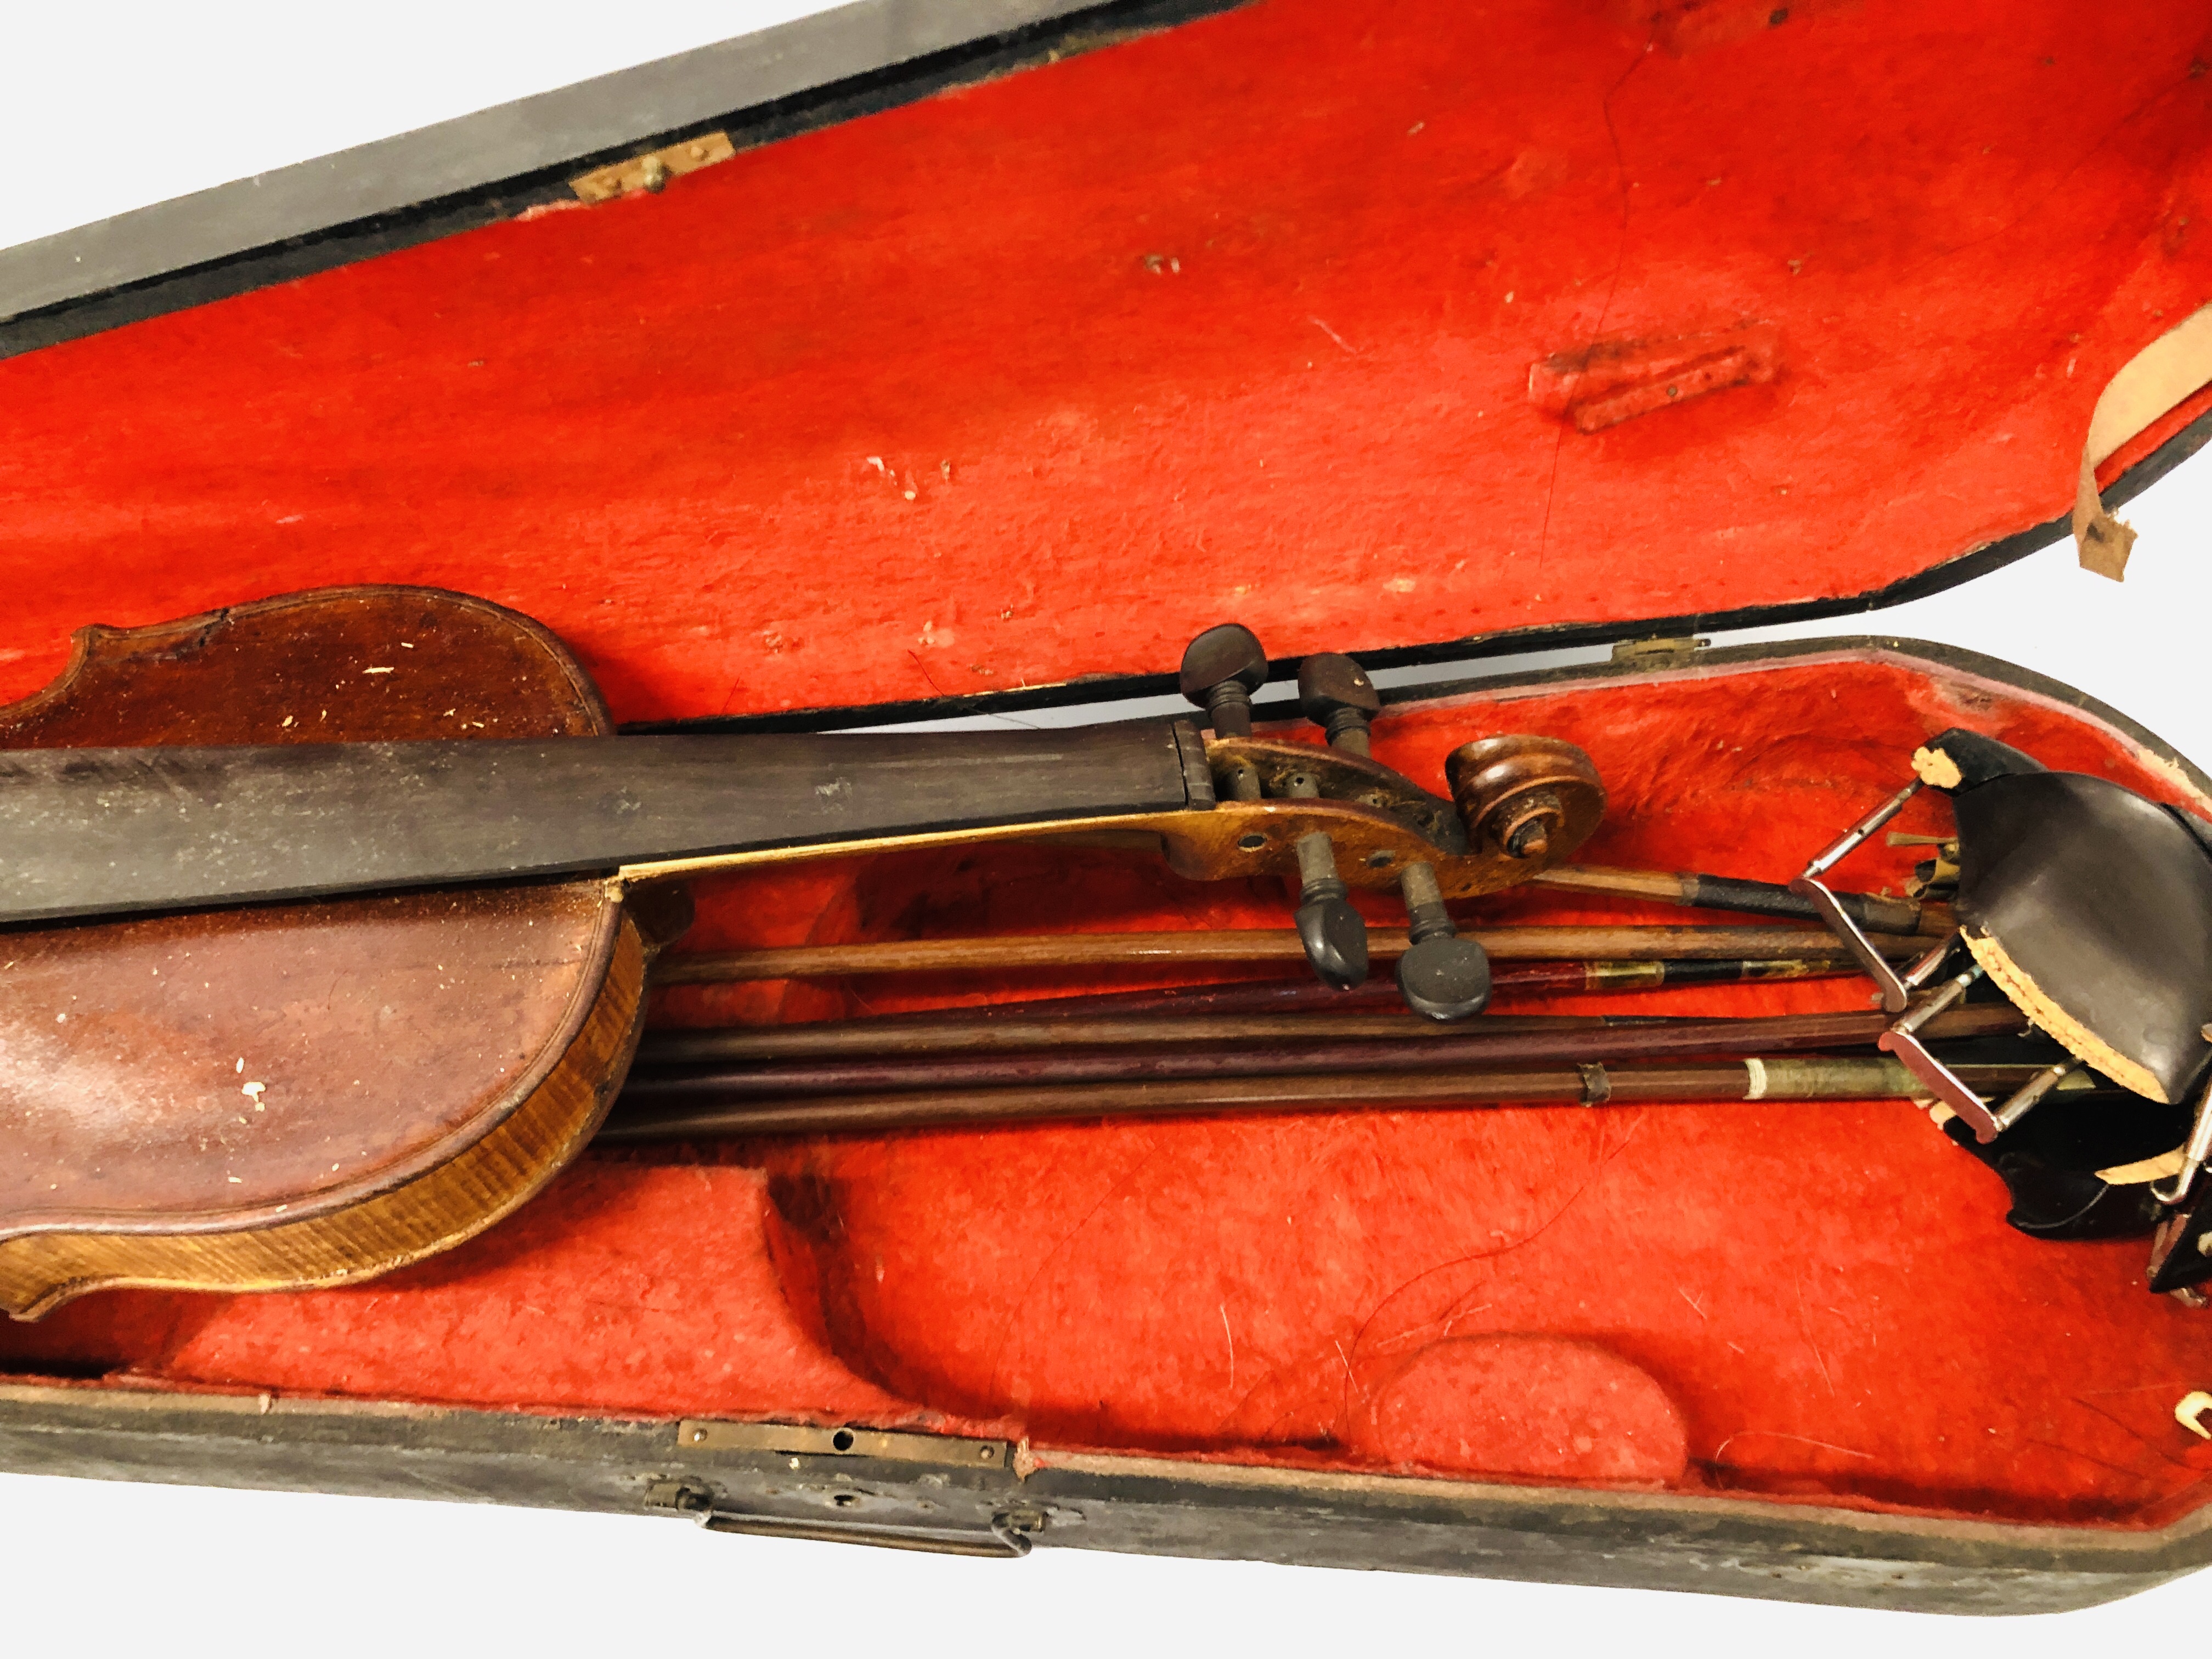 4 X VINTAGE VIOLINS AND 2 WOODEN CASES, VARIOUS BOWS (NO STRINGS) FOR RESTORATION. - Image 16 of 20